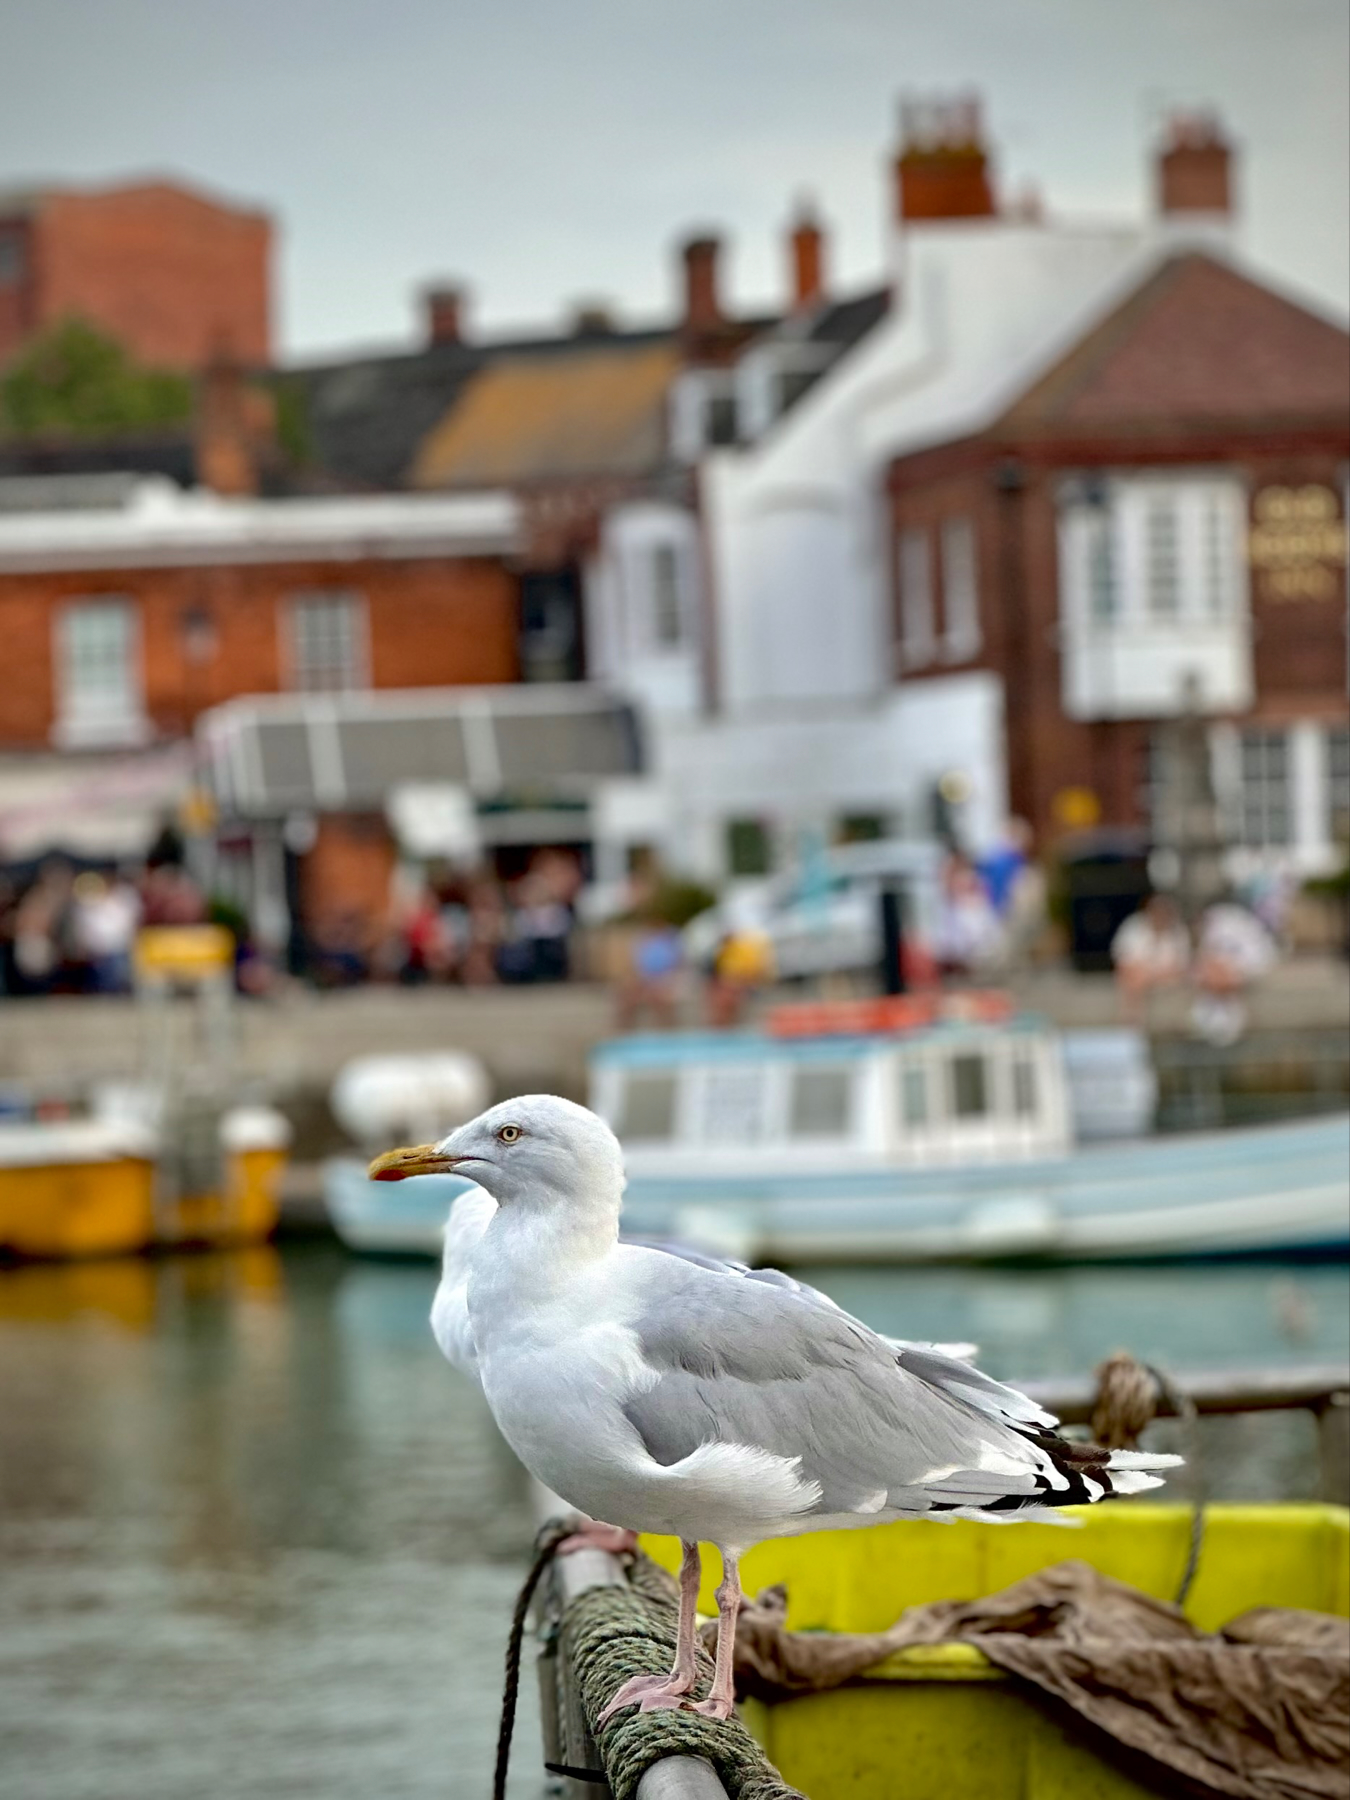 A seagull sat on the edge of a ship in Weymouth harbor